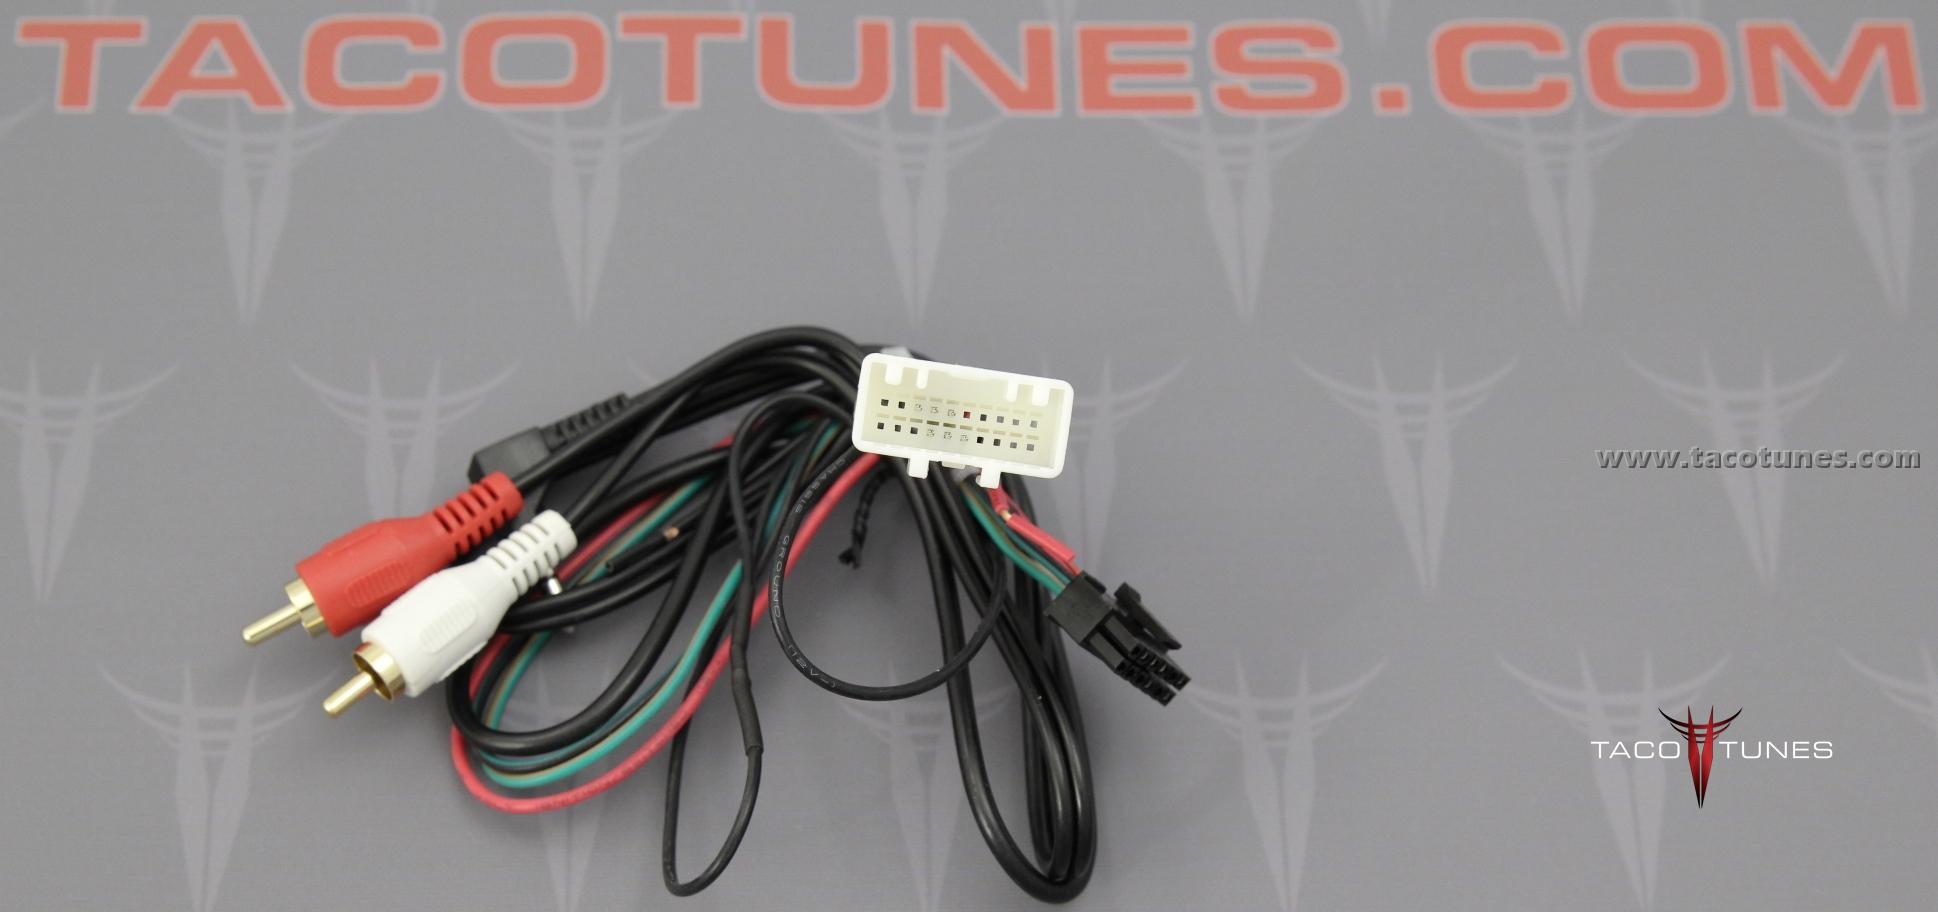 Toyota Tacoma Engine Wiring Harness from tacotunes.com